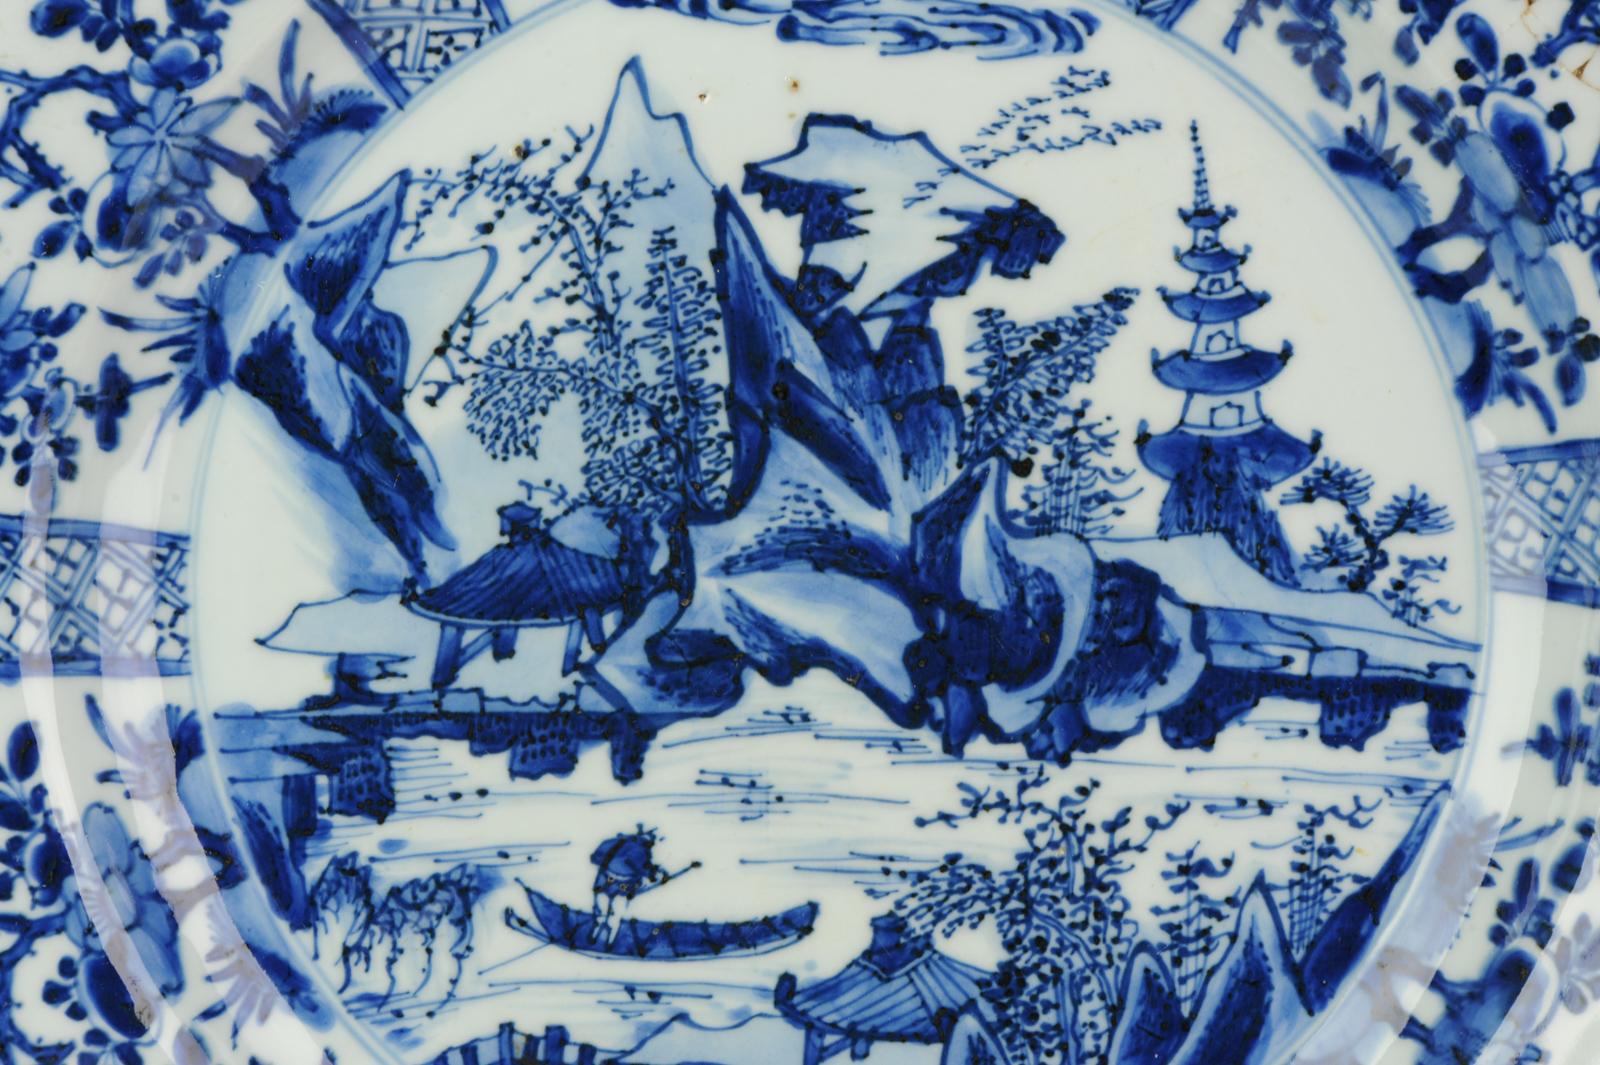 Qing Antique 35CM 1622-1722 Kangxi Period Chinese Porcelain Charger Marked